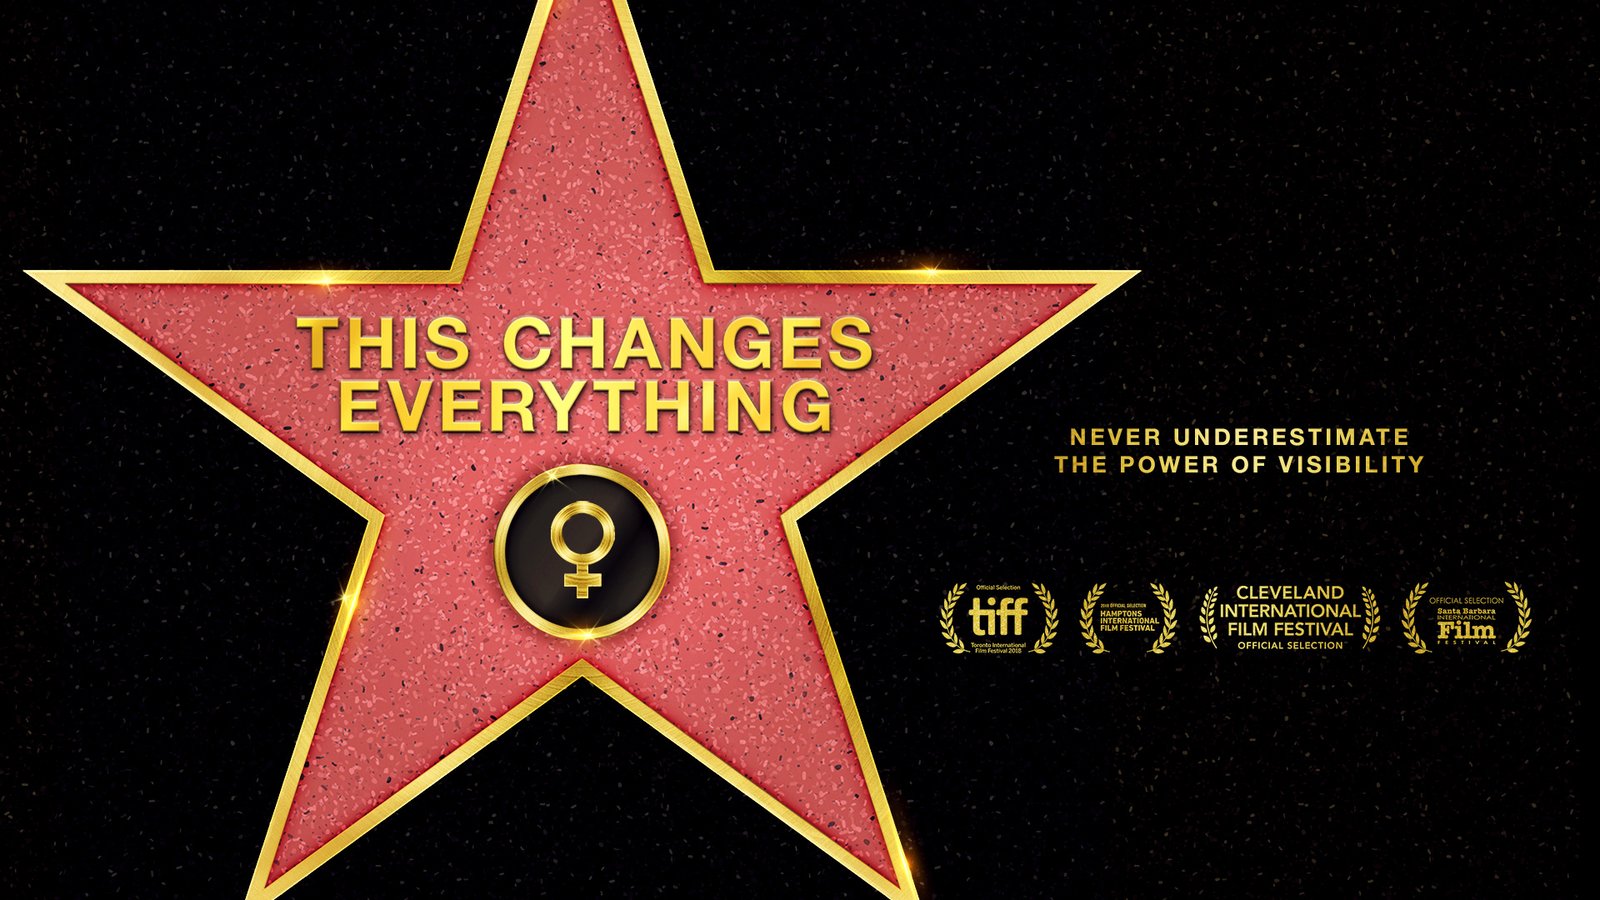 This Changes Everything - An Analysis of Gender Disparity in Hollywood